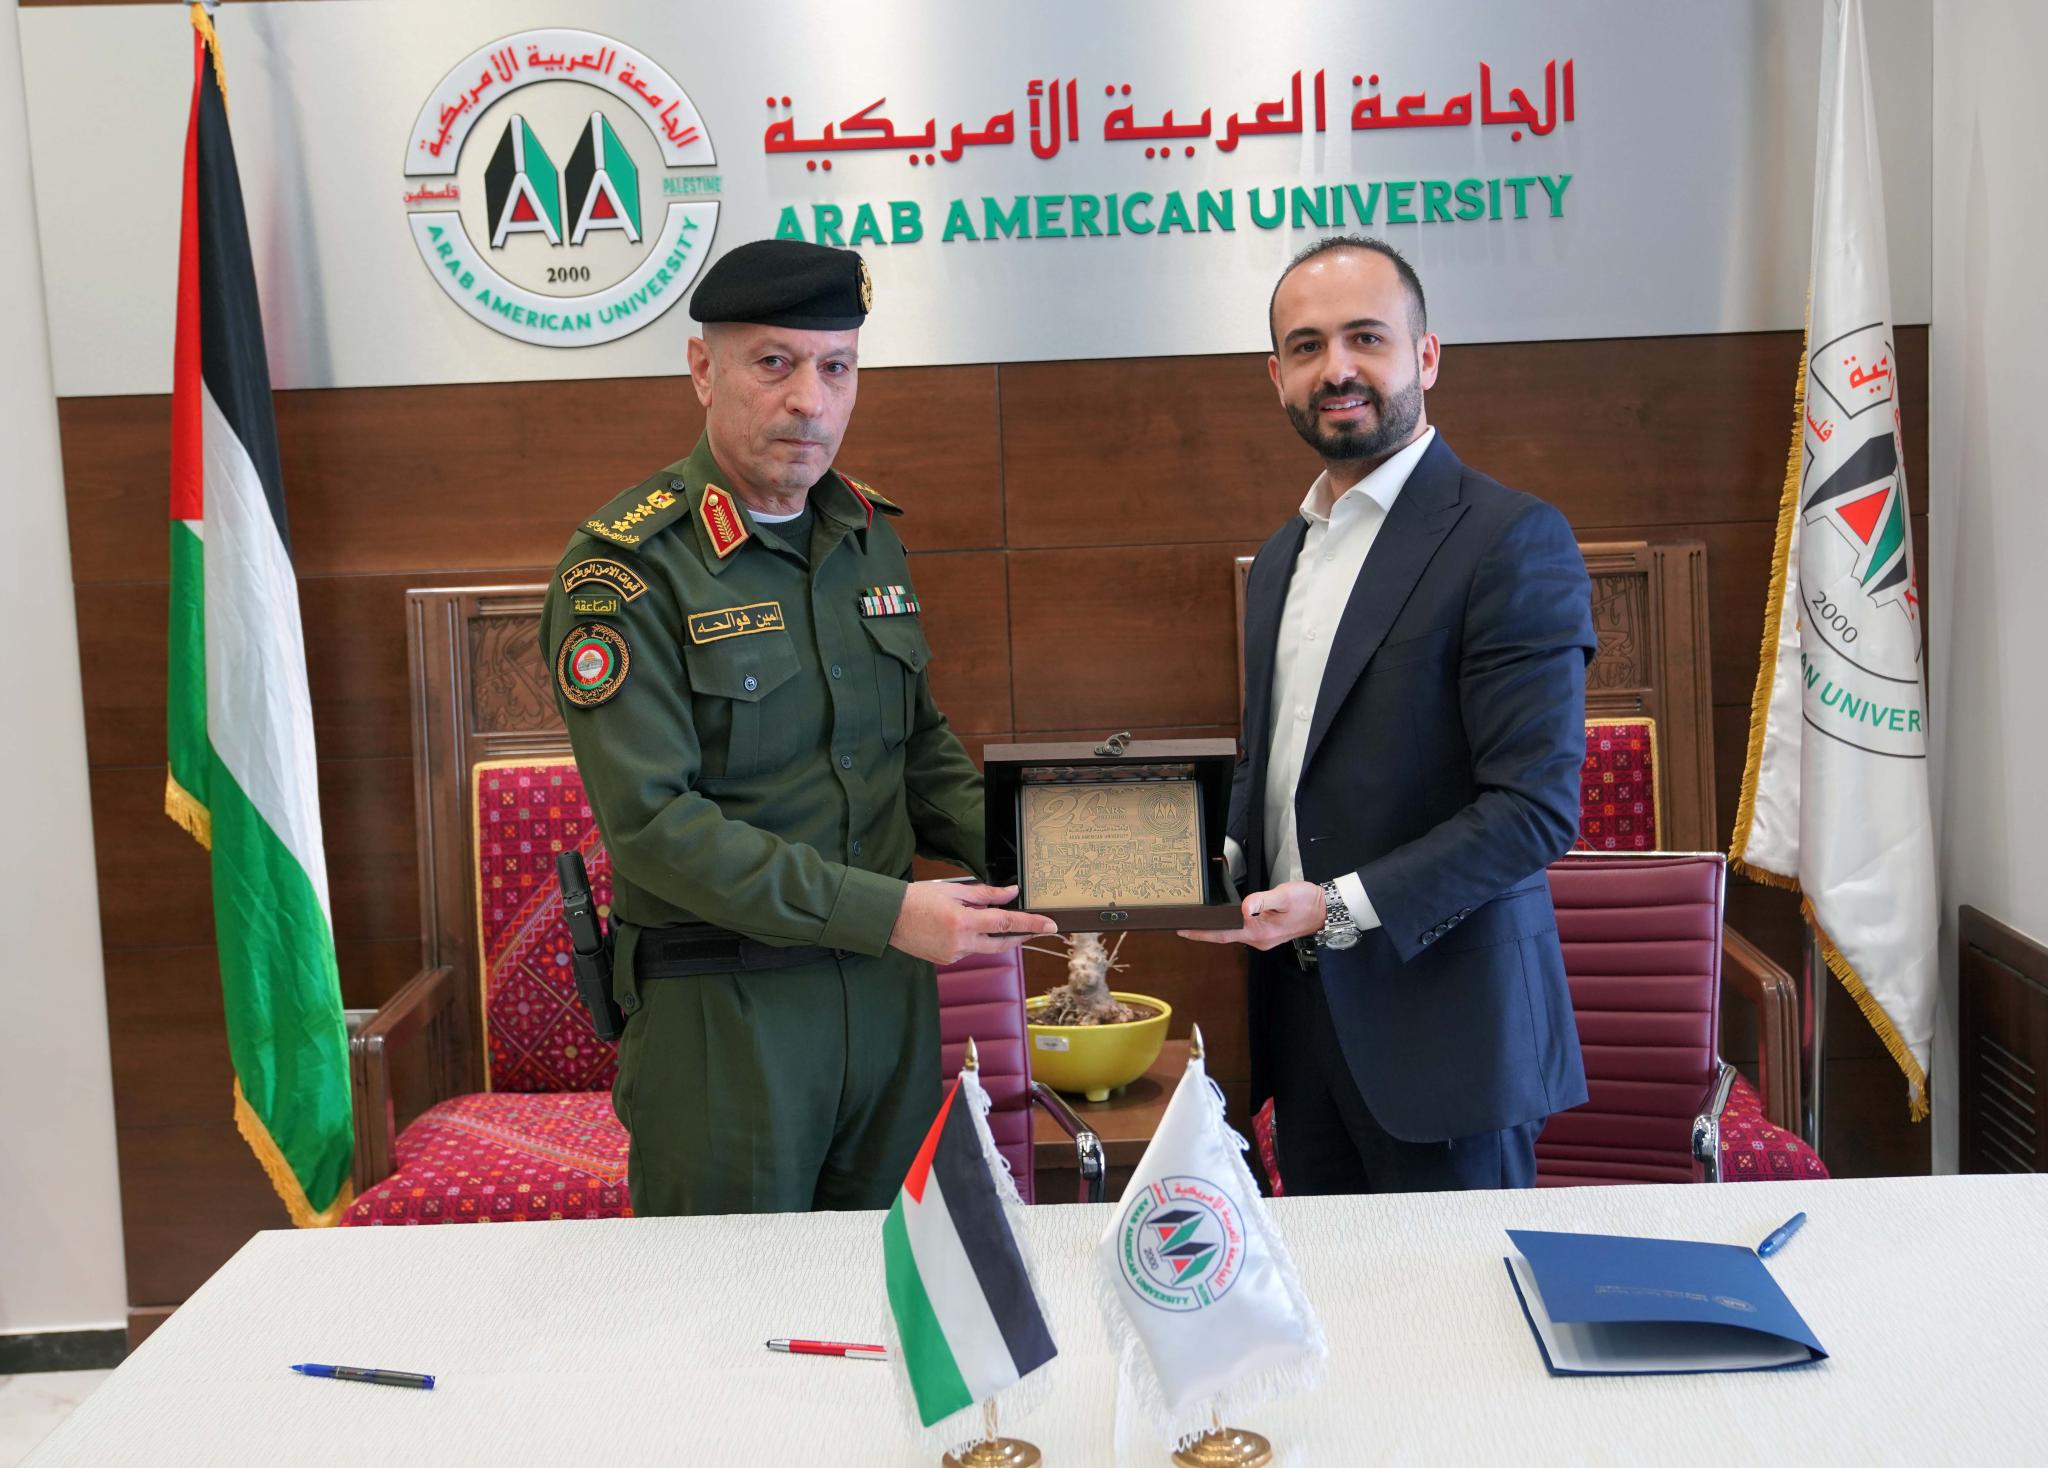 AAUP and National Security Forces Sign a Memorandum of Cooperation and Understanding